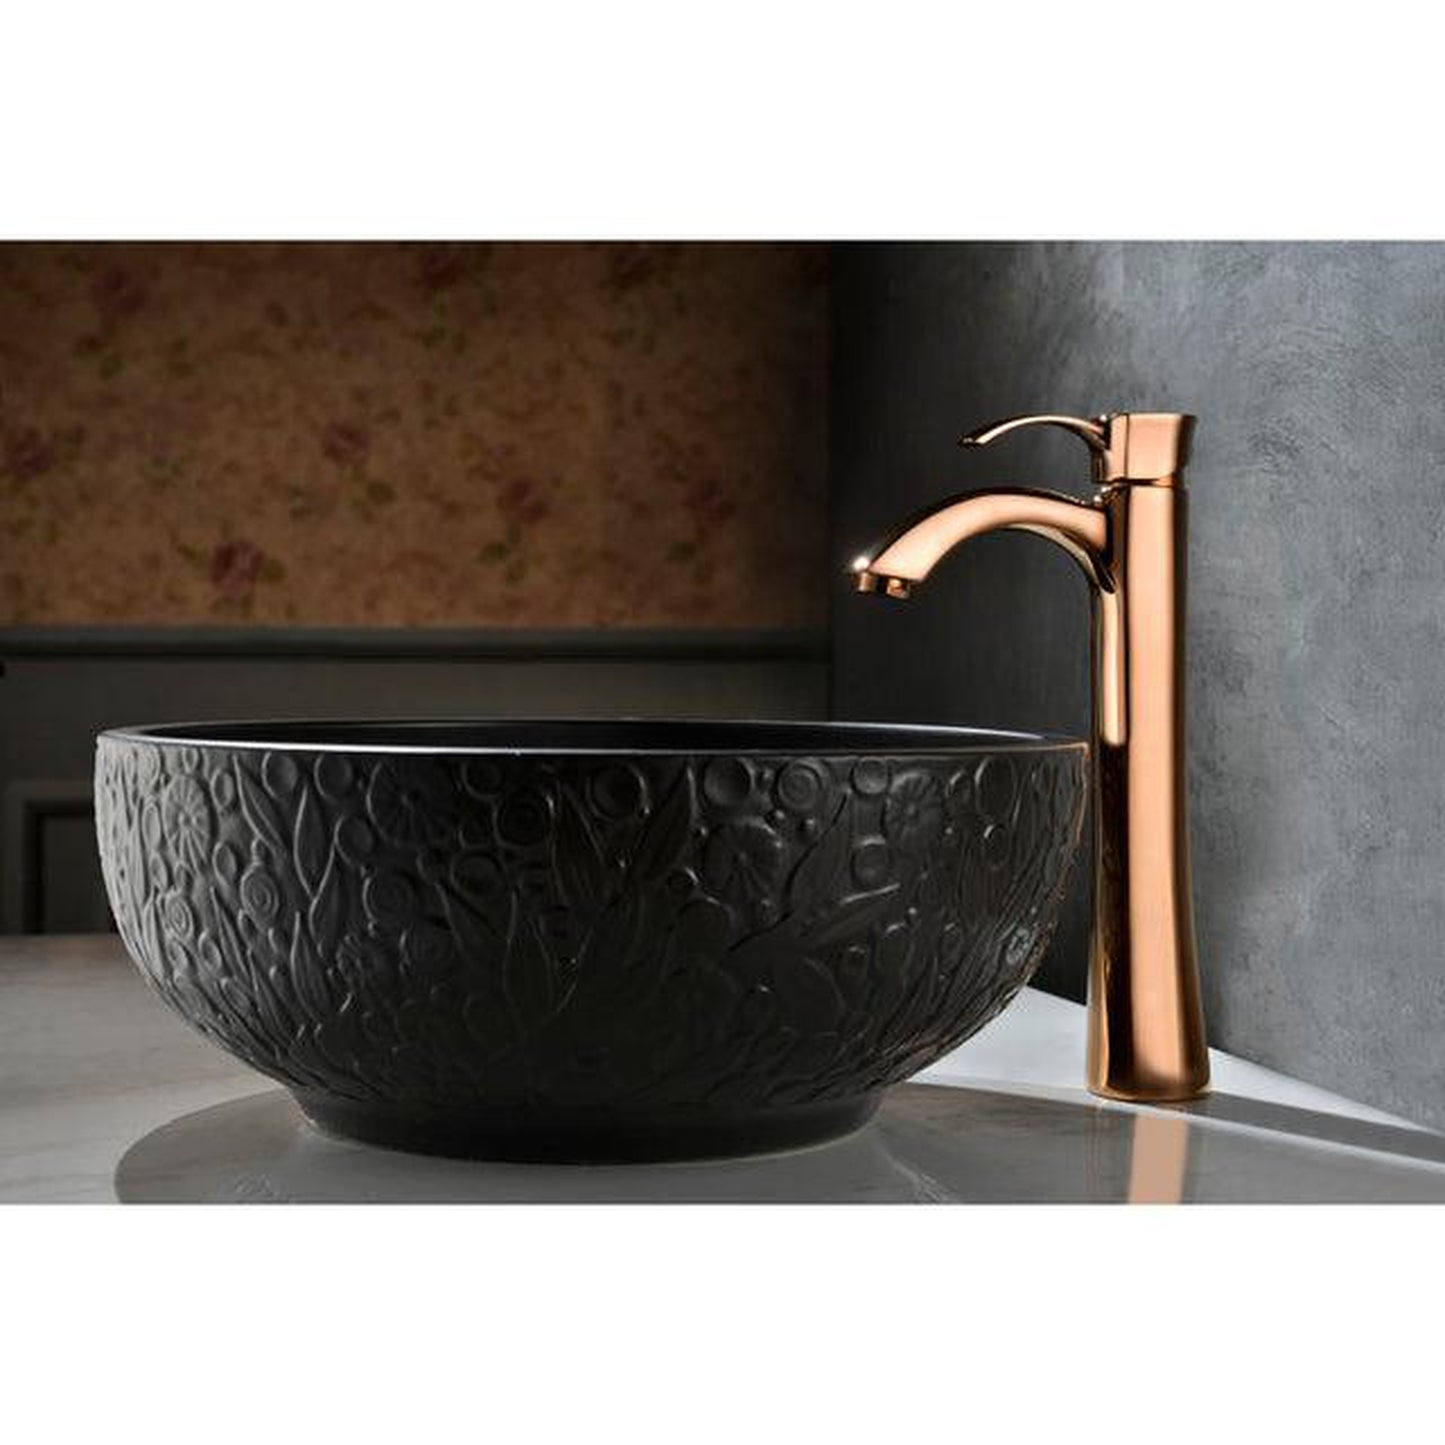 ANZZI Harmony Series 9" Single Hole Rose Gold Bathroom Sink Faucet